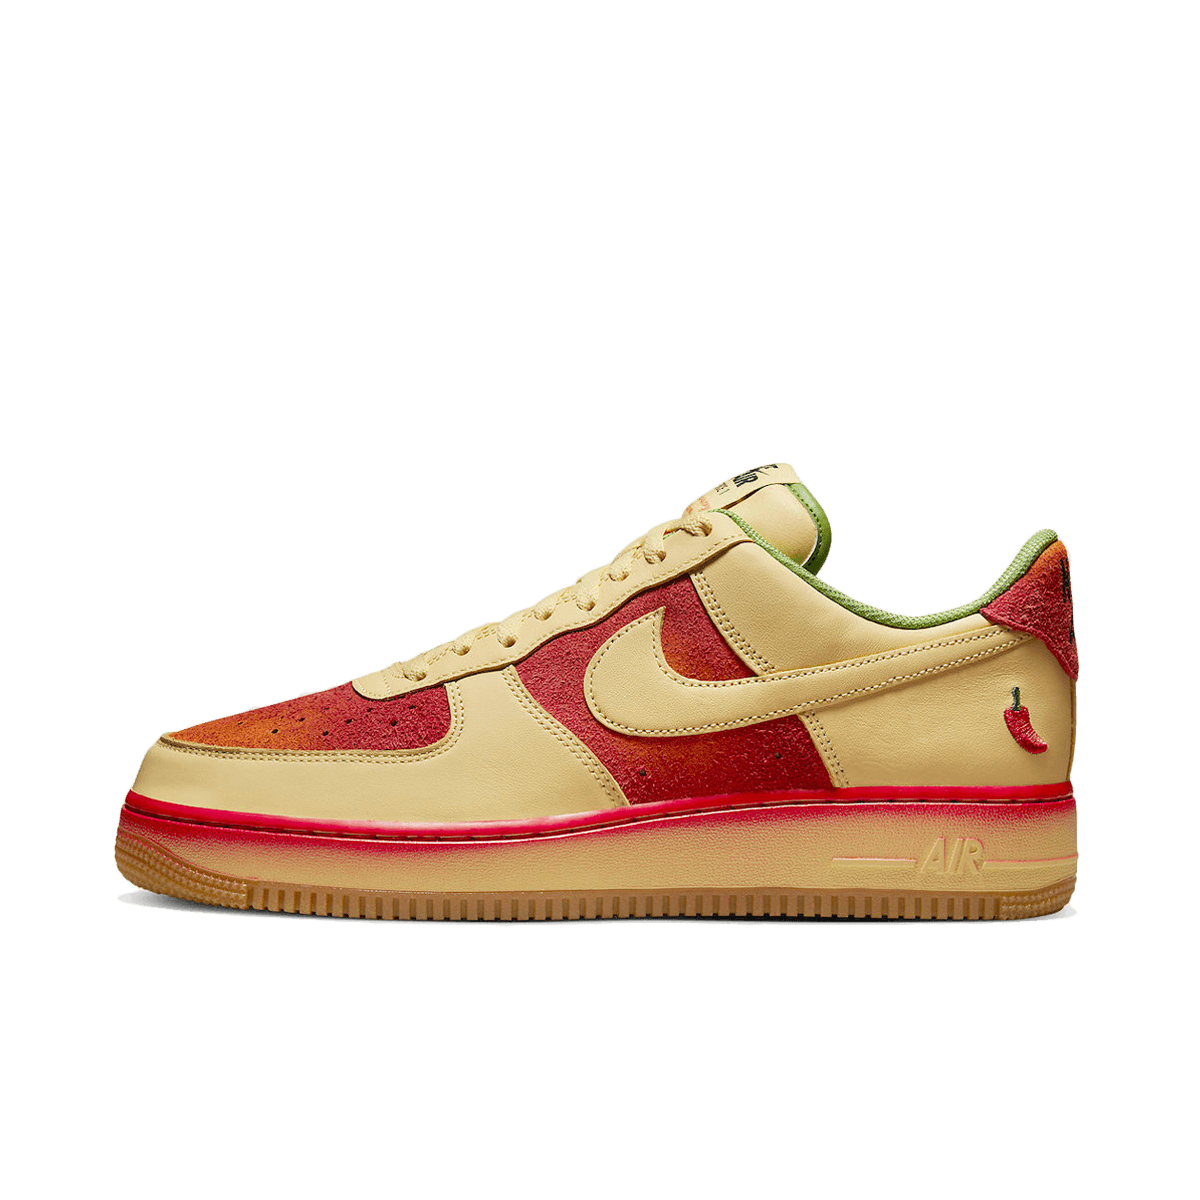 Nike Air Force 1 Low 'Chili Pepper' DZ4493-700